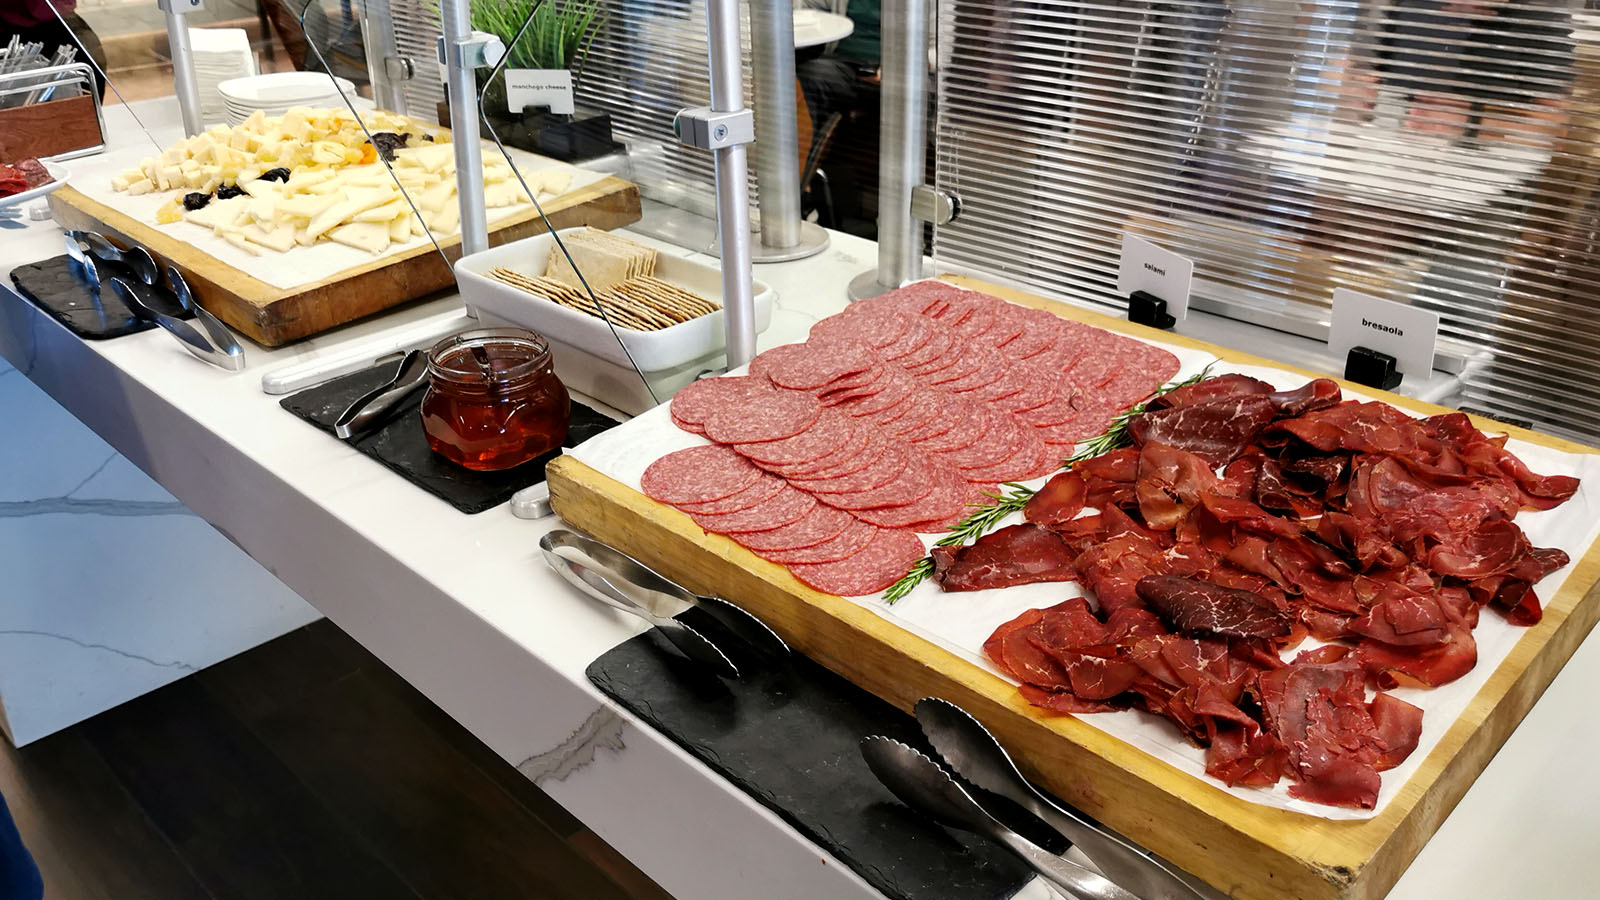 Meats and cheese in Delta's JFK lounge